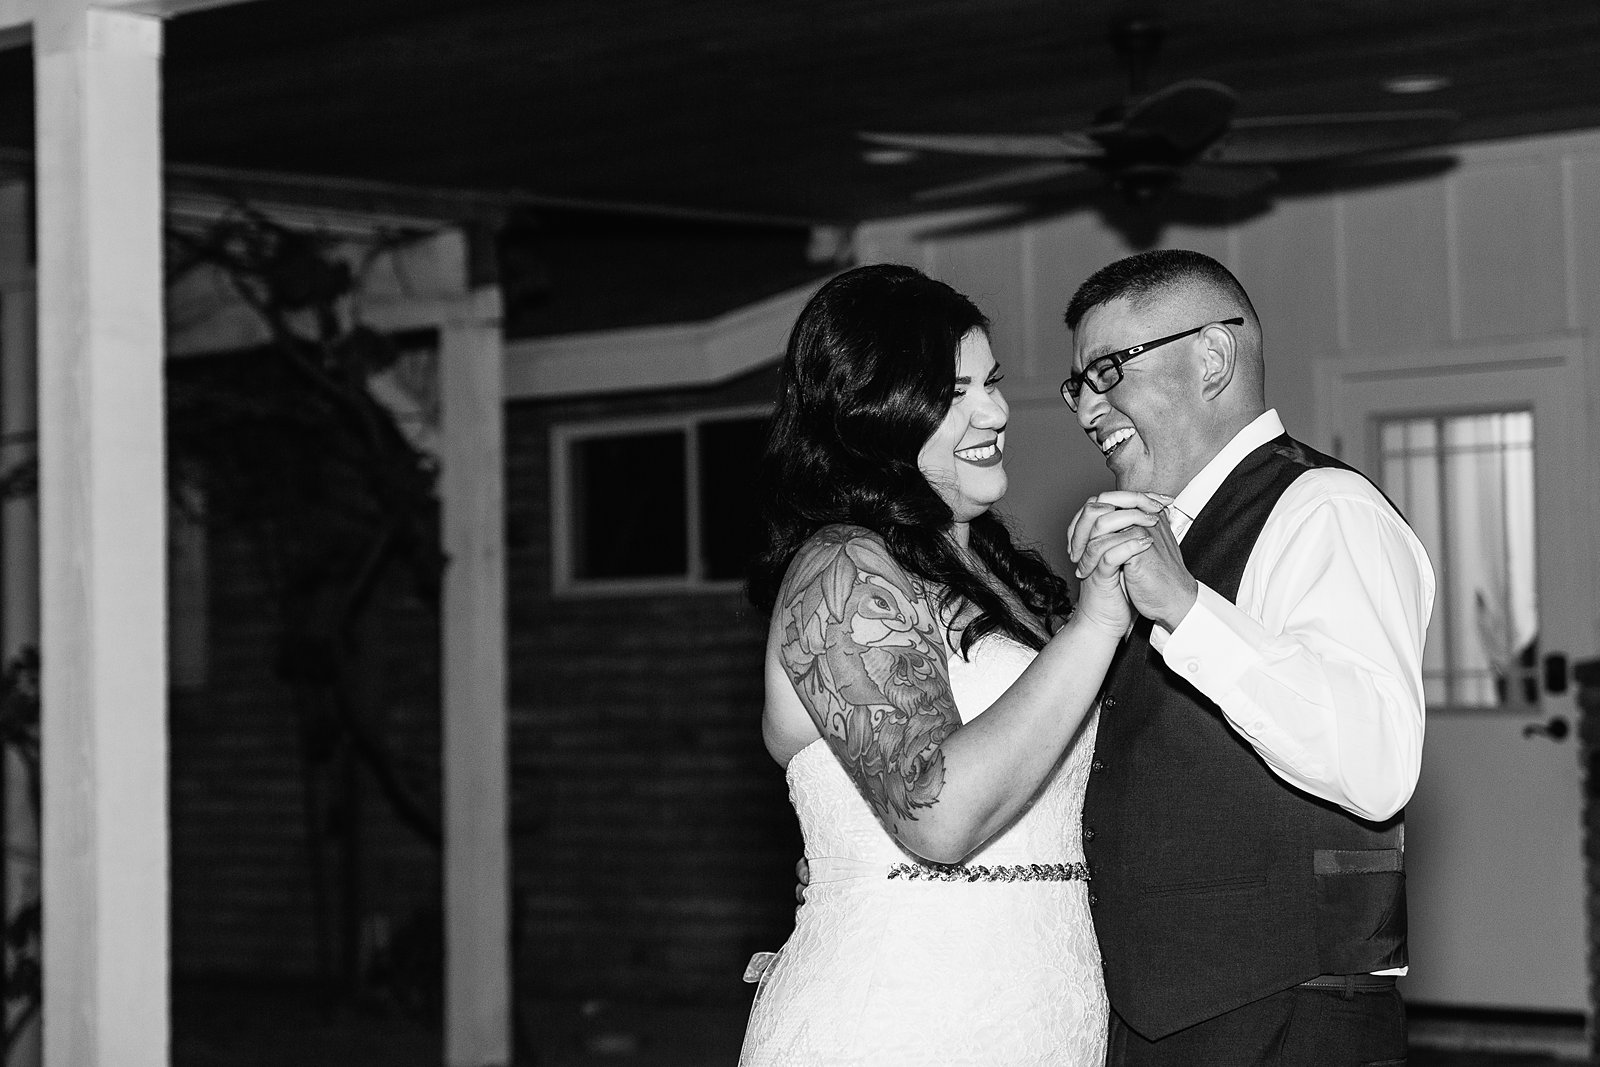 Bride and groom sharing first dance at their The Farmhouse at Schnepf Farms wedding reception by Arizona wedding photographer PMA Photography.